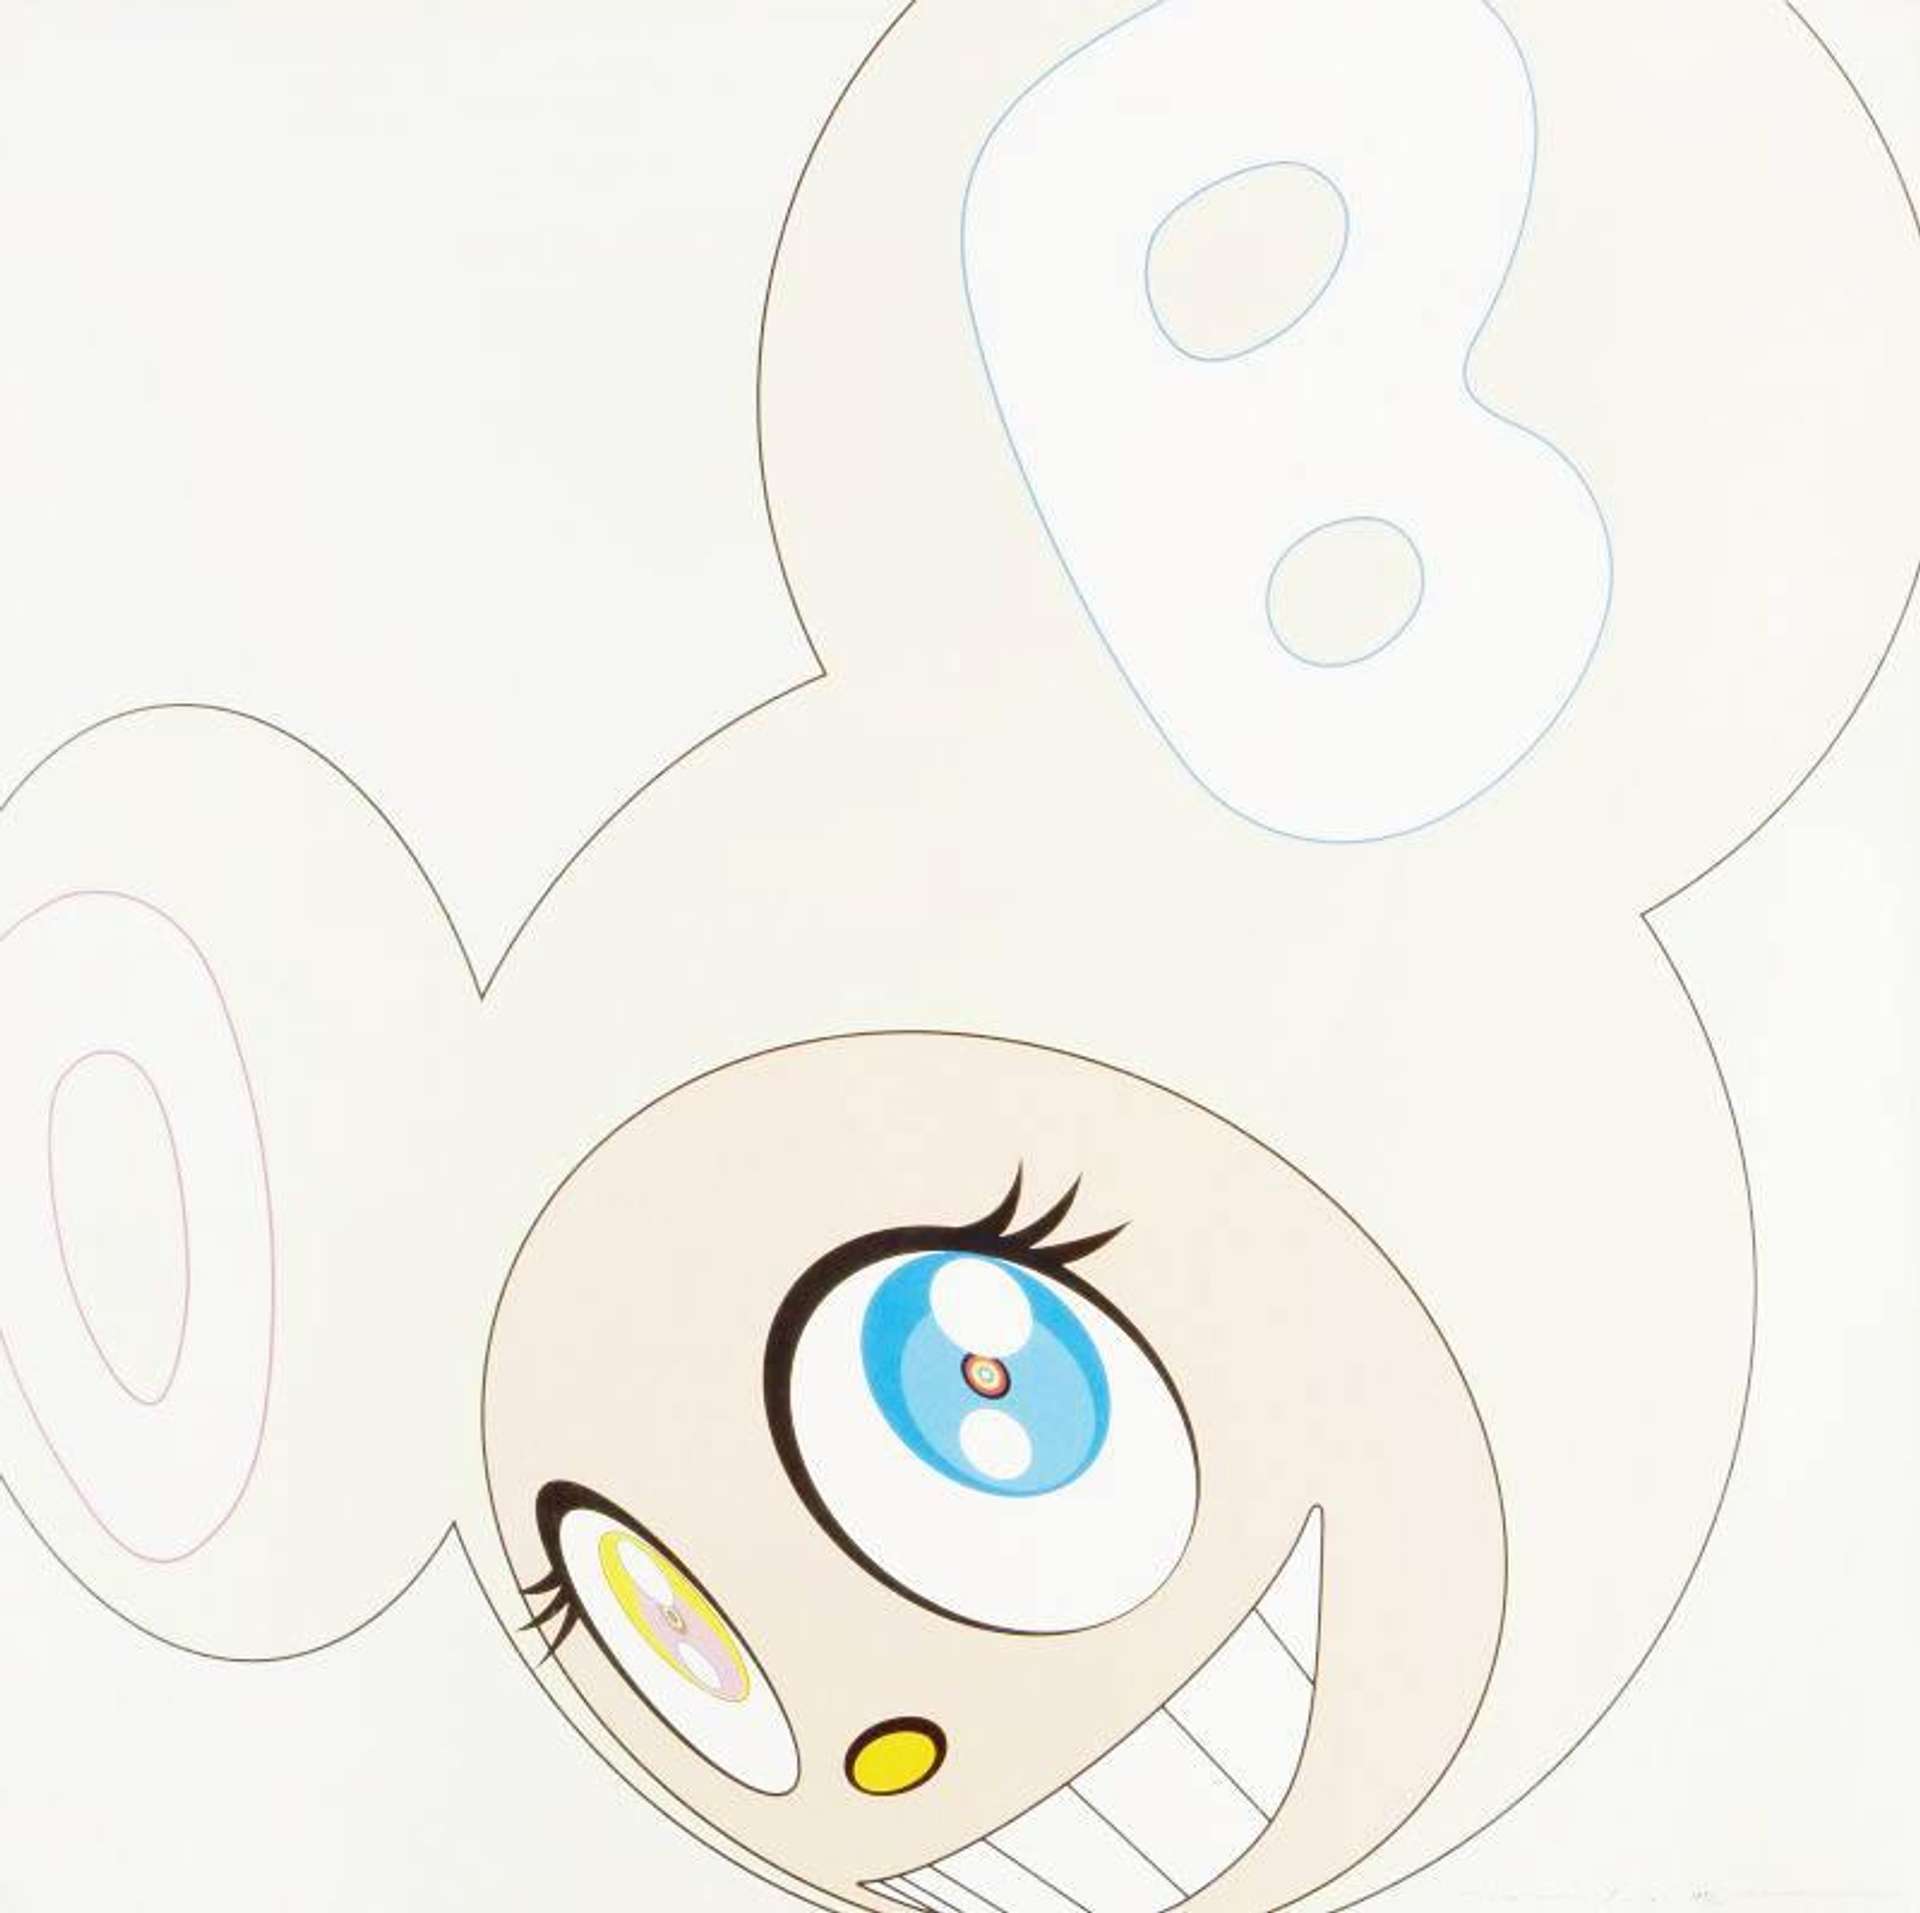 Takashi Murakami’s DOB (white). A Neo Pop screenprint of a close up of an animated white character with one yellow eye and one blue eye, smiling. 